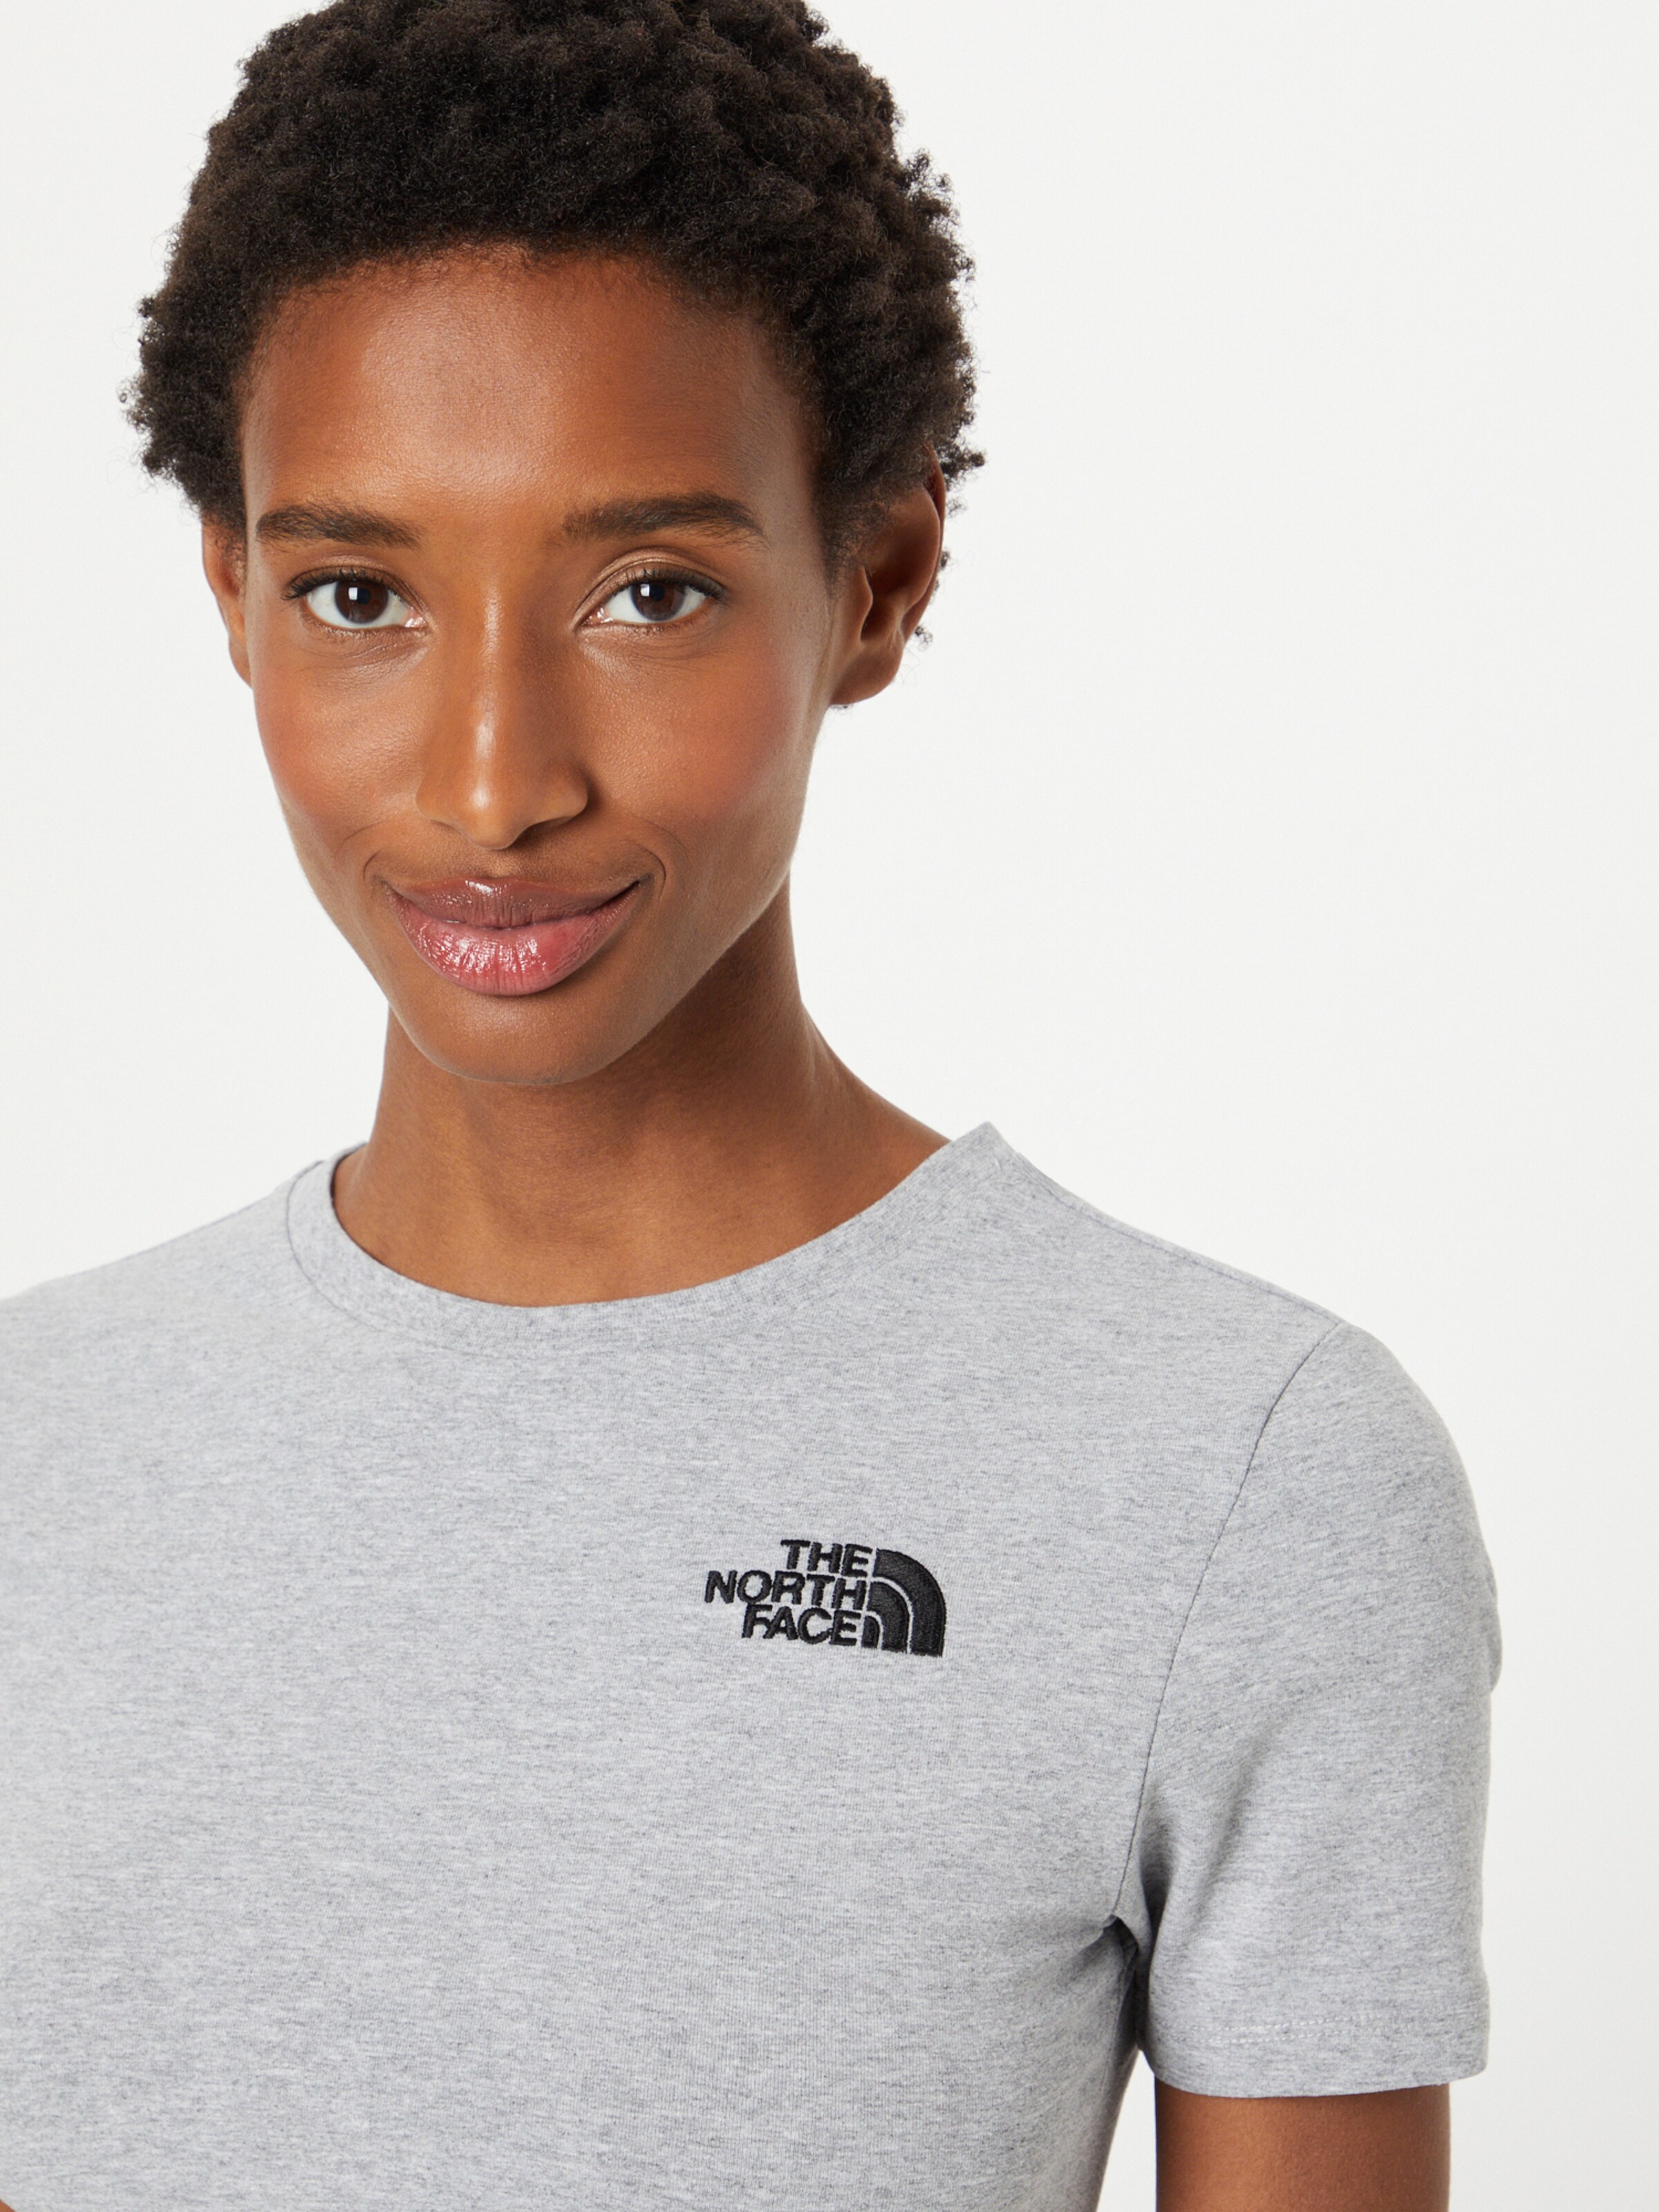 Frauen Shirts & Tops THE NORTH FACE T-Shirt in Graumeliert - KC79079